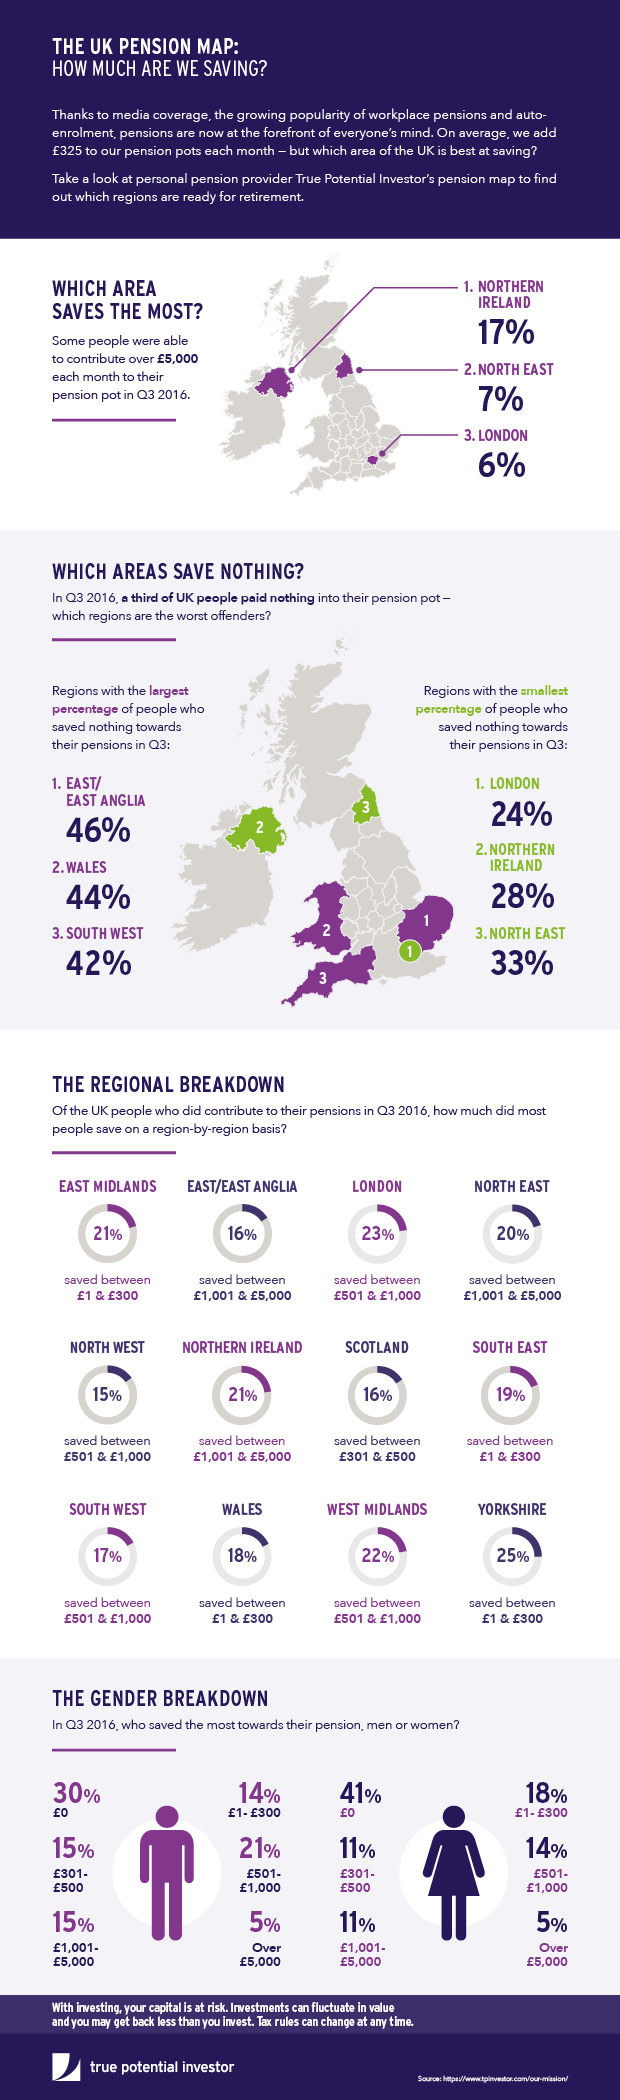 Pensions Map Infographic from Fintech Company: How Much Are We Saving?